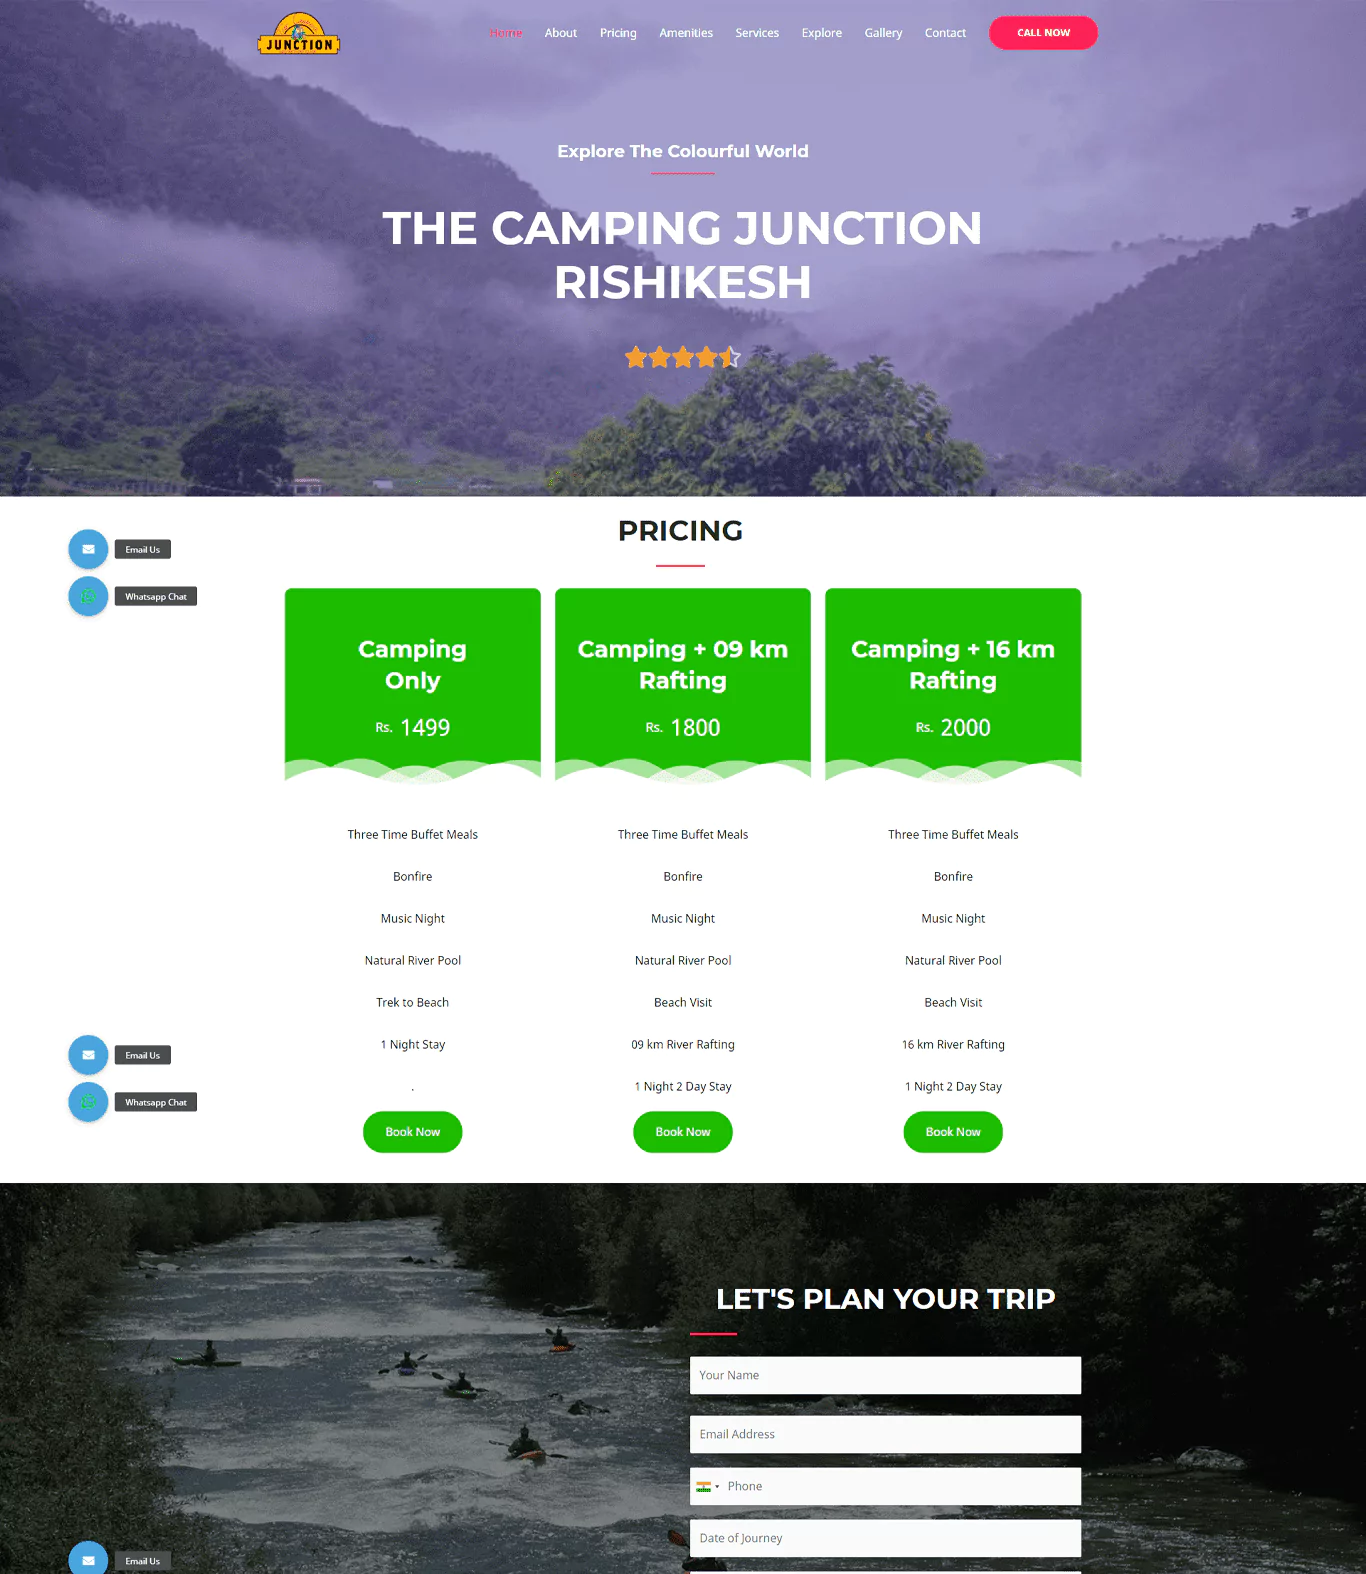 The Camping Junction